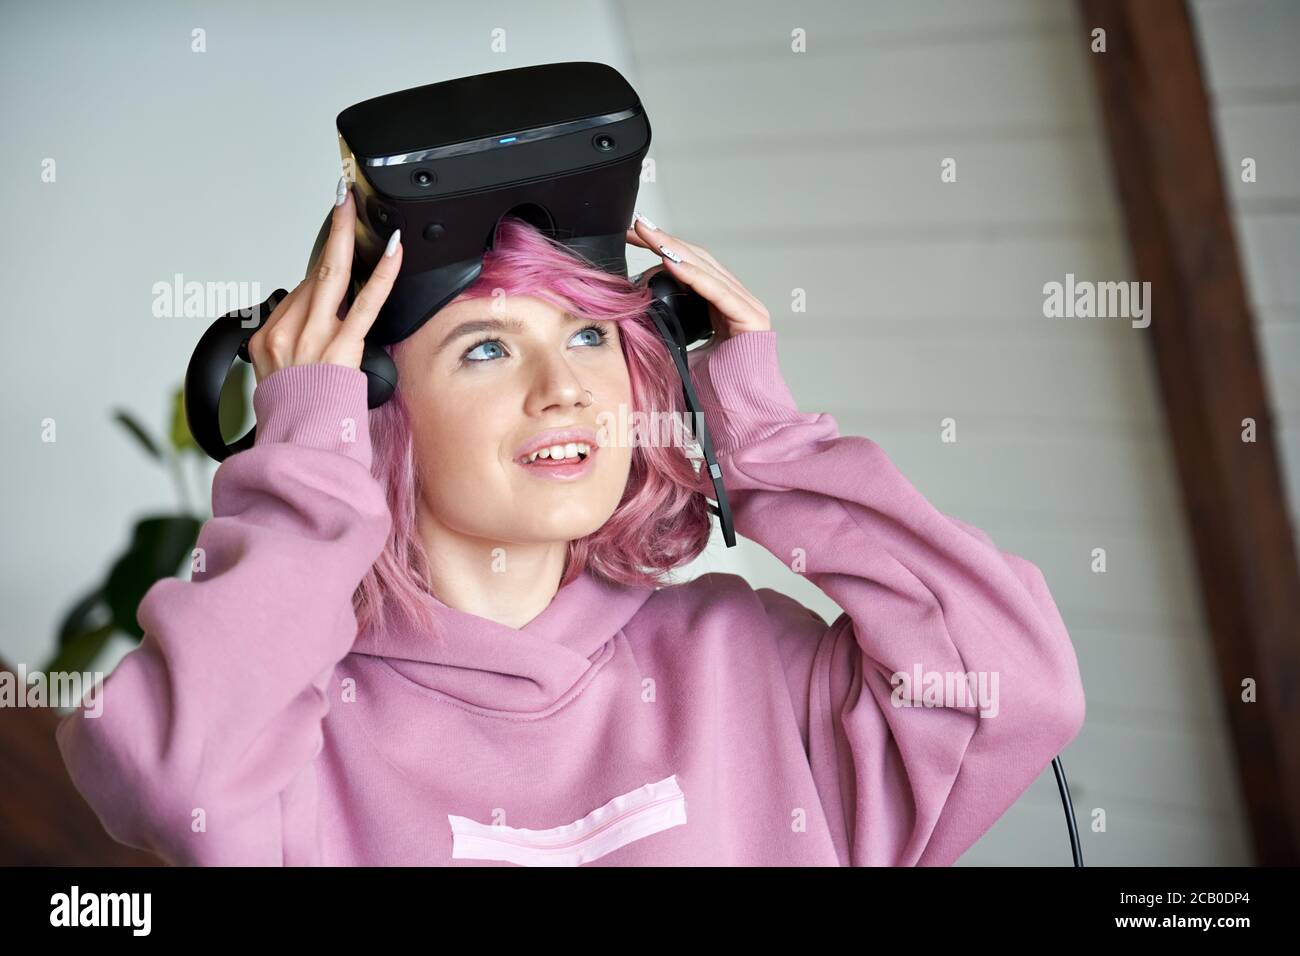 Excited teen girl with pink hair wear vr headset hold controller looking up. Stock Photo